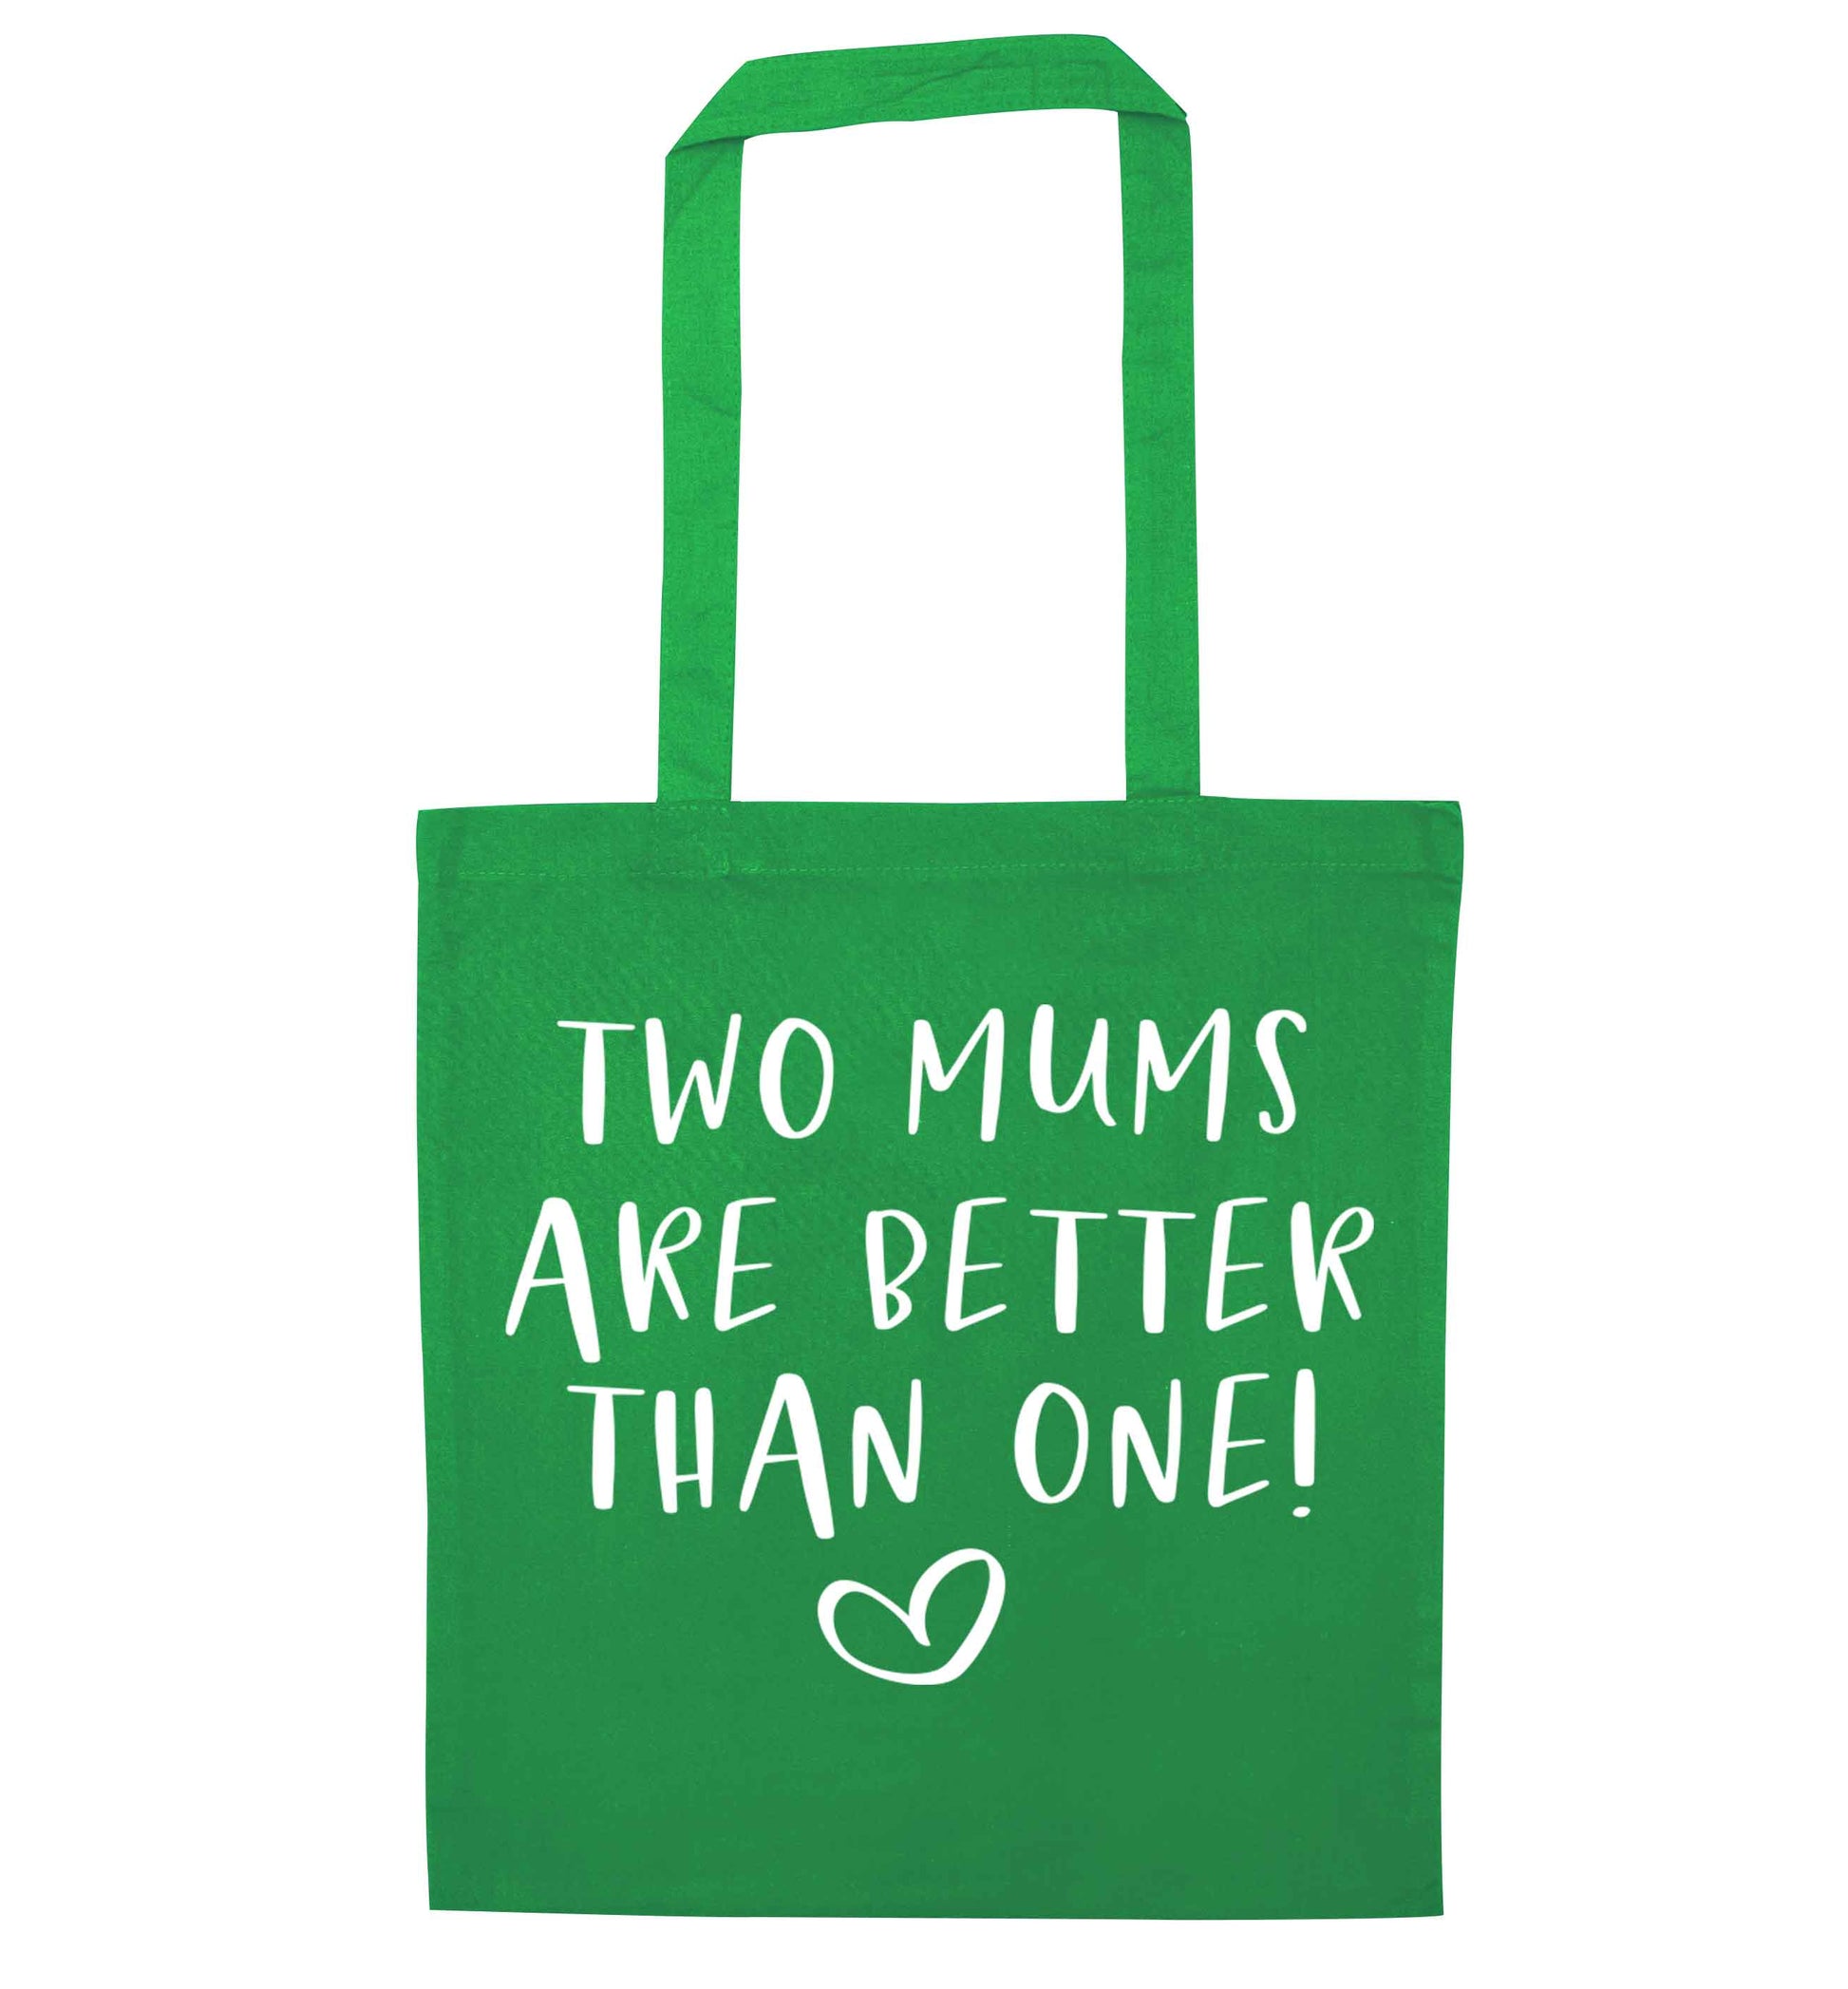 Two mums are better than one green tote bag